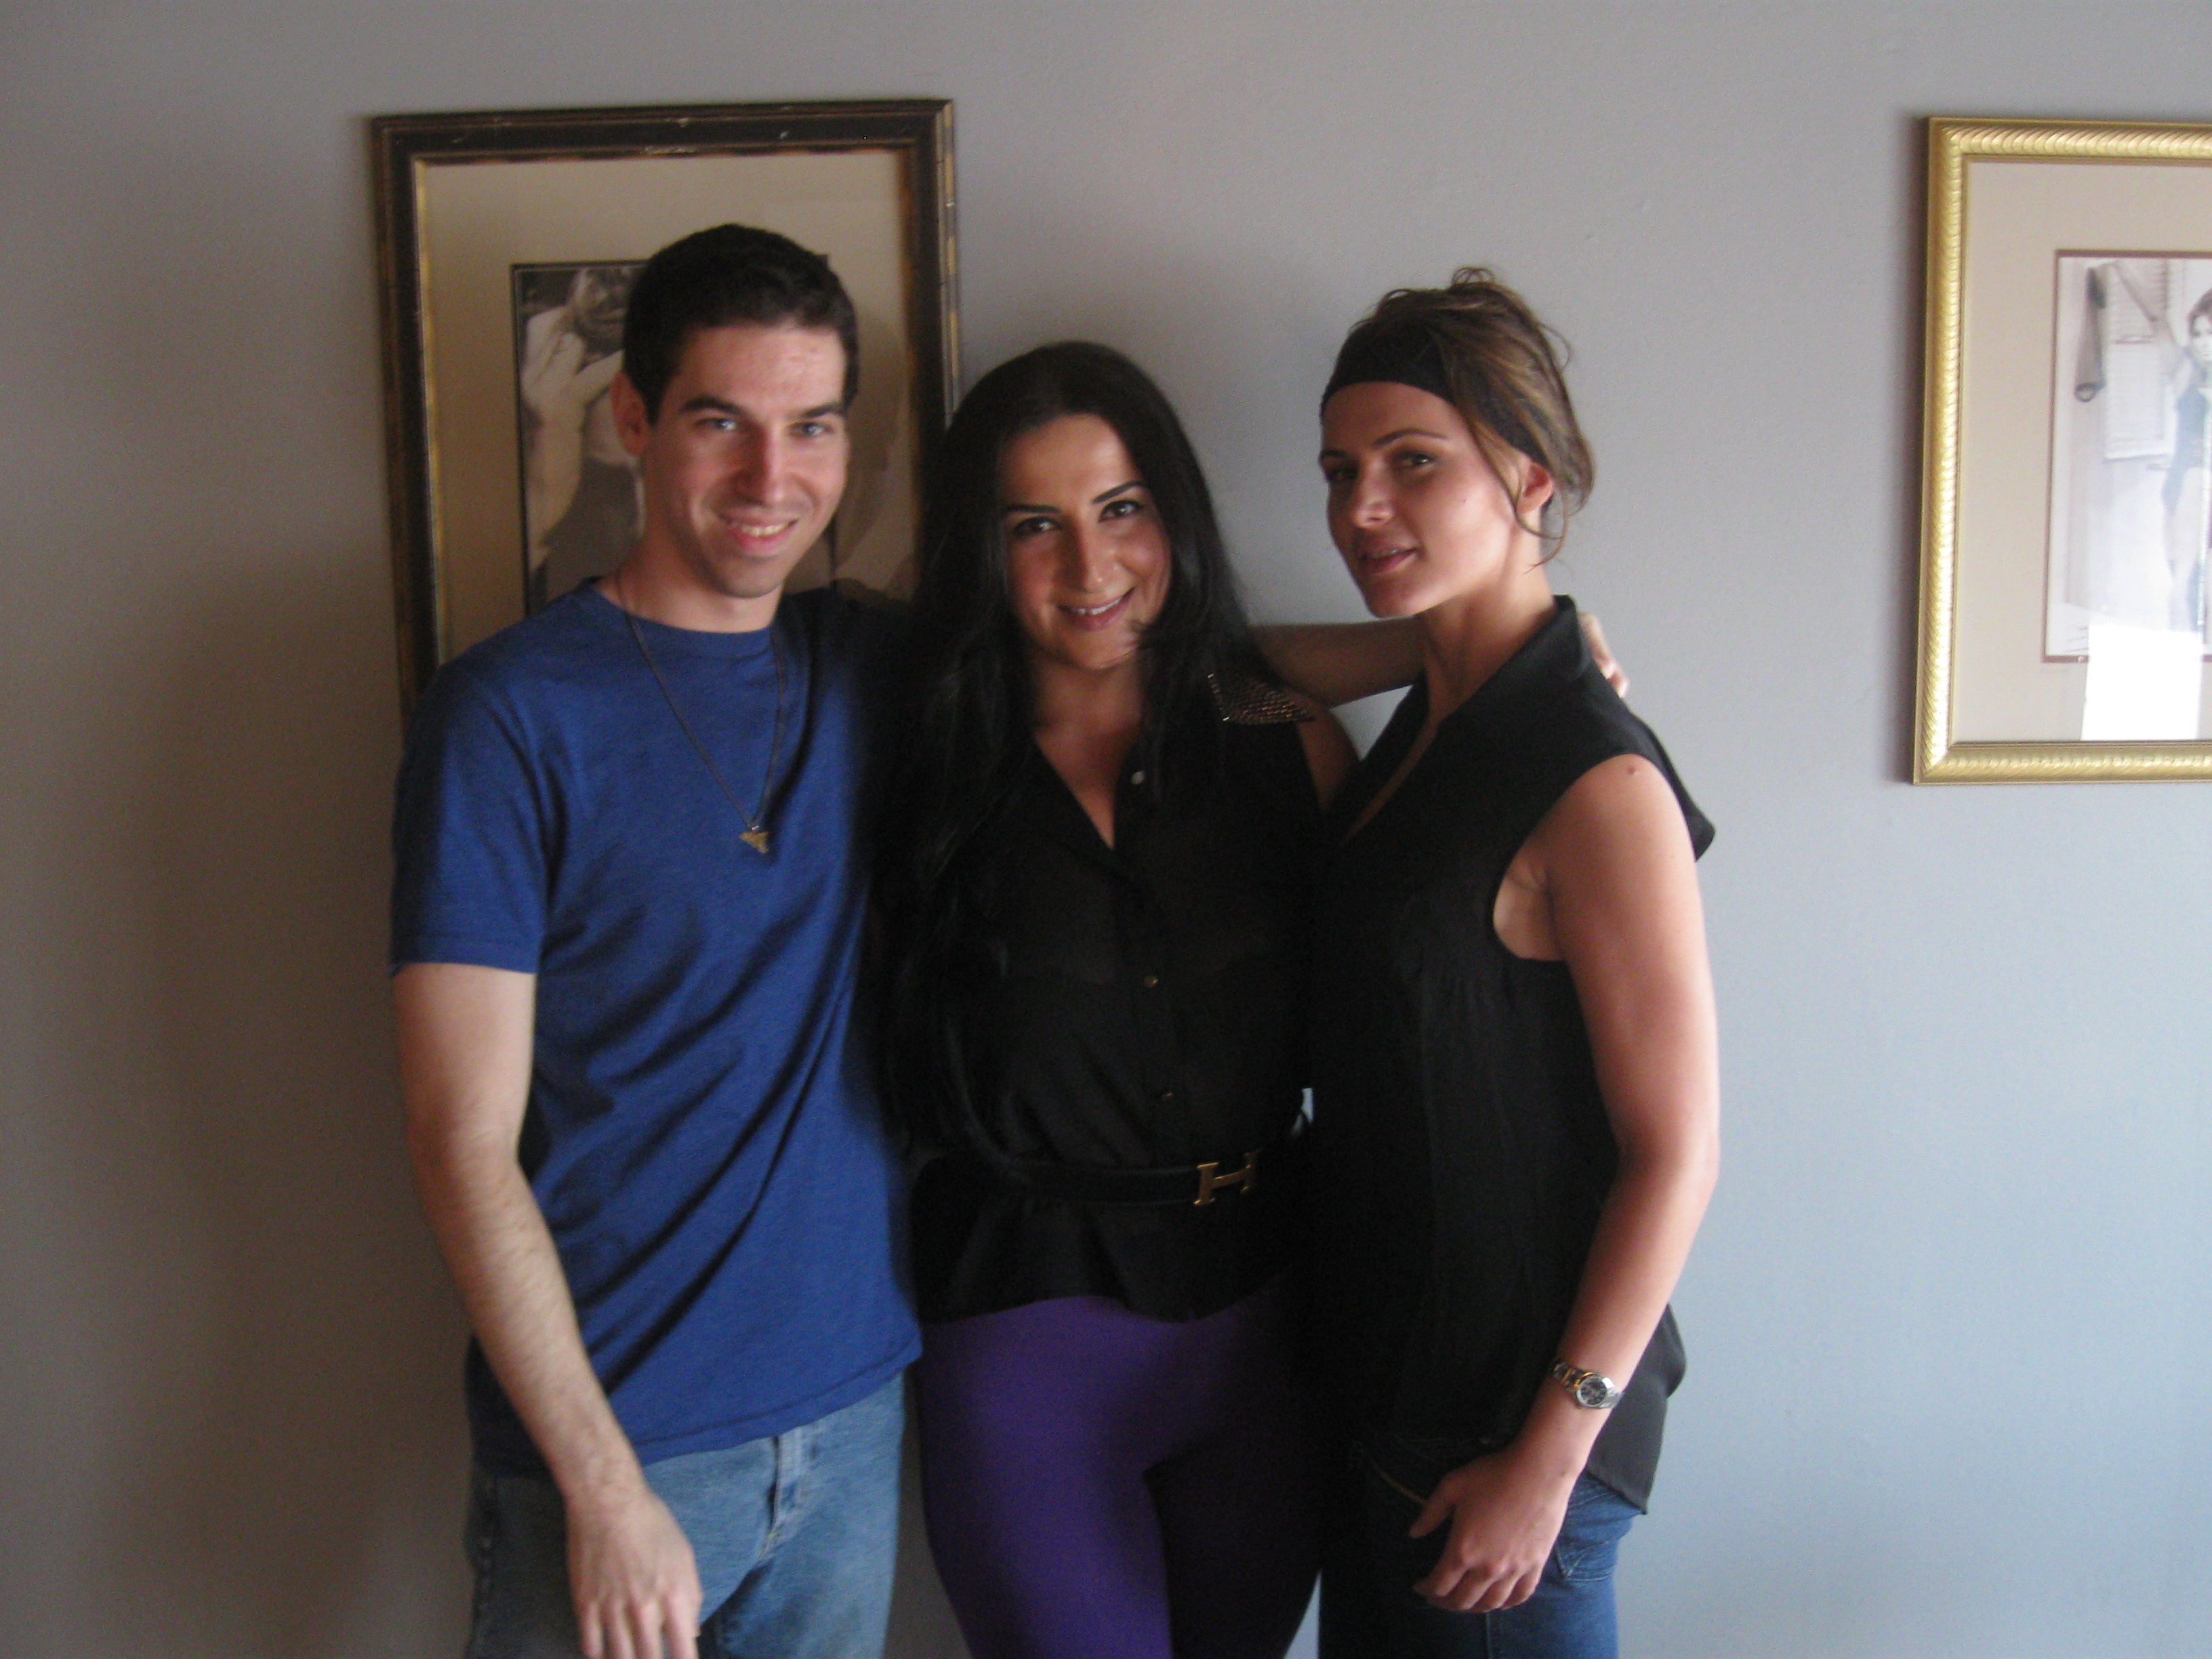 Michael Matteo Rossi with Maria Kocharian and Eve Mauro